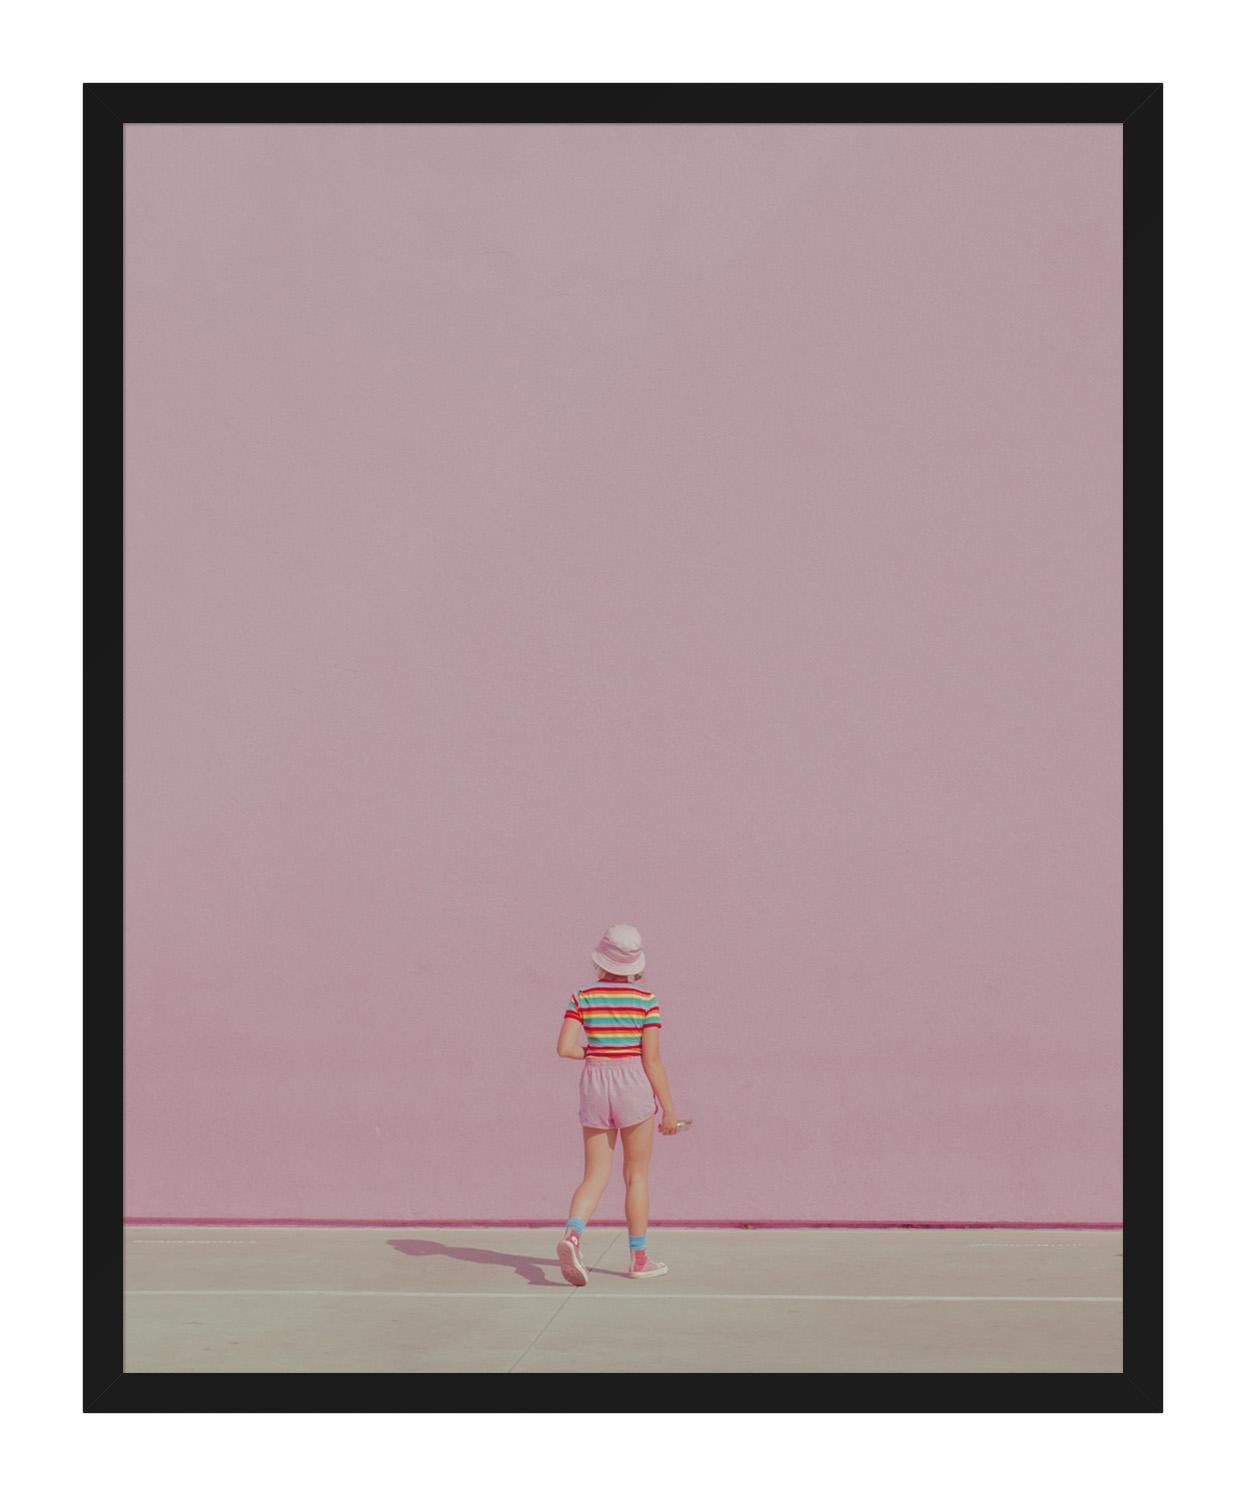 ABOUT THIS ARTIST: Originally from Paris, France, Franck Bohbot now lives and works in Los Angeles, California. Bohbot's art explores the extraordinary of everyday life. His dreamlike style of soft color-saturated pictures and carefully constructed